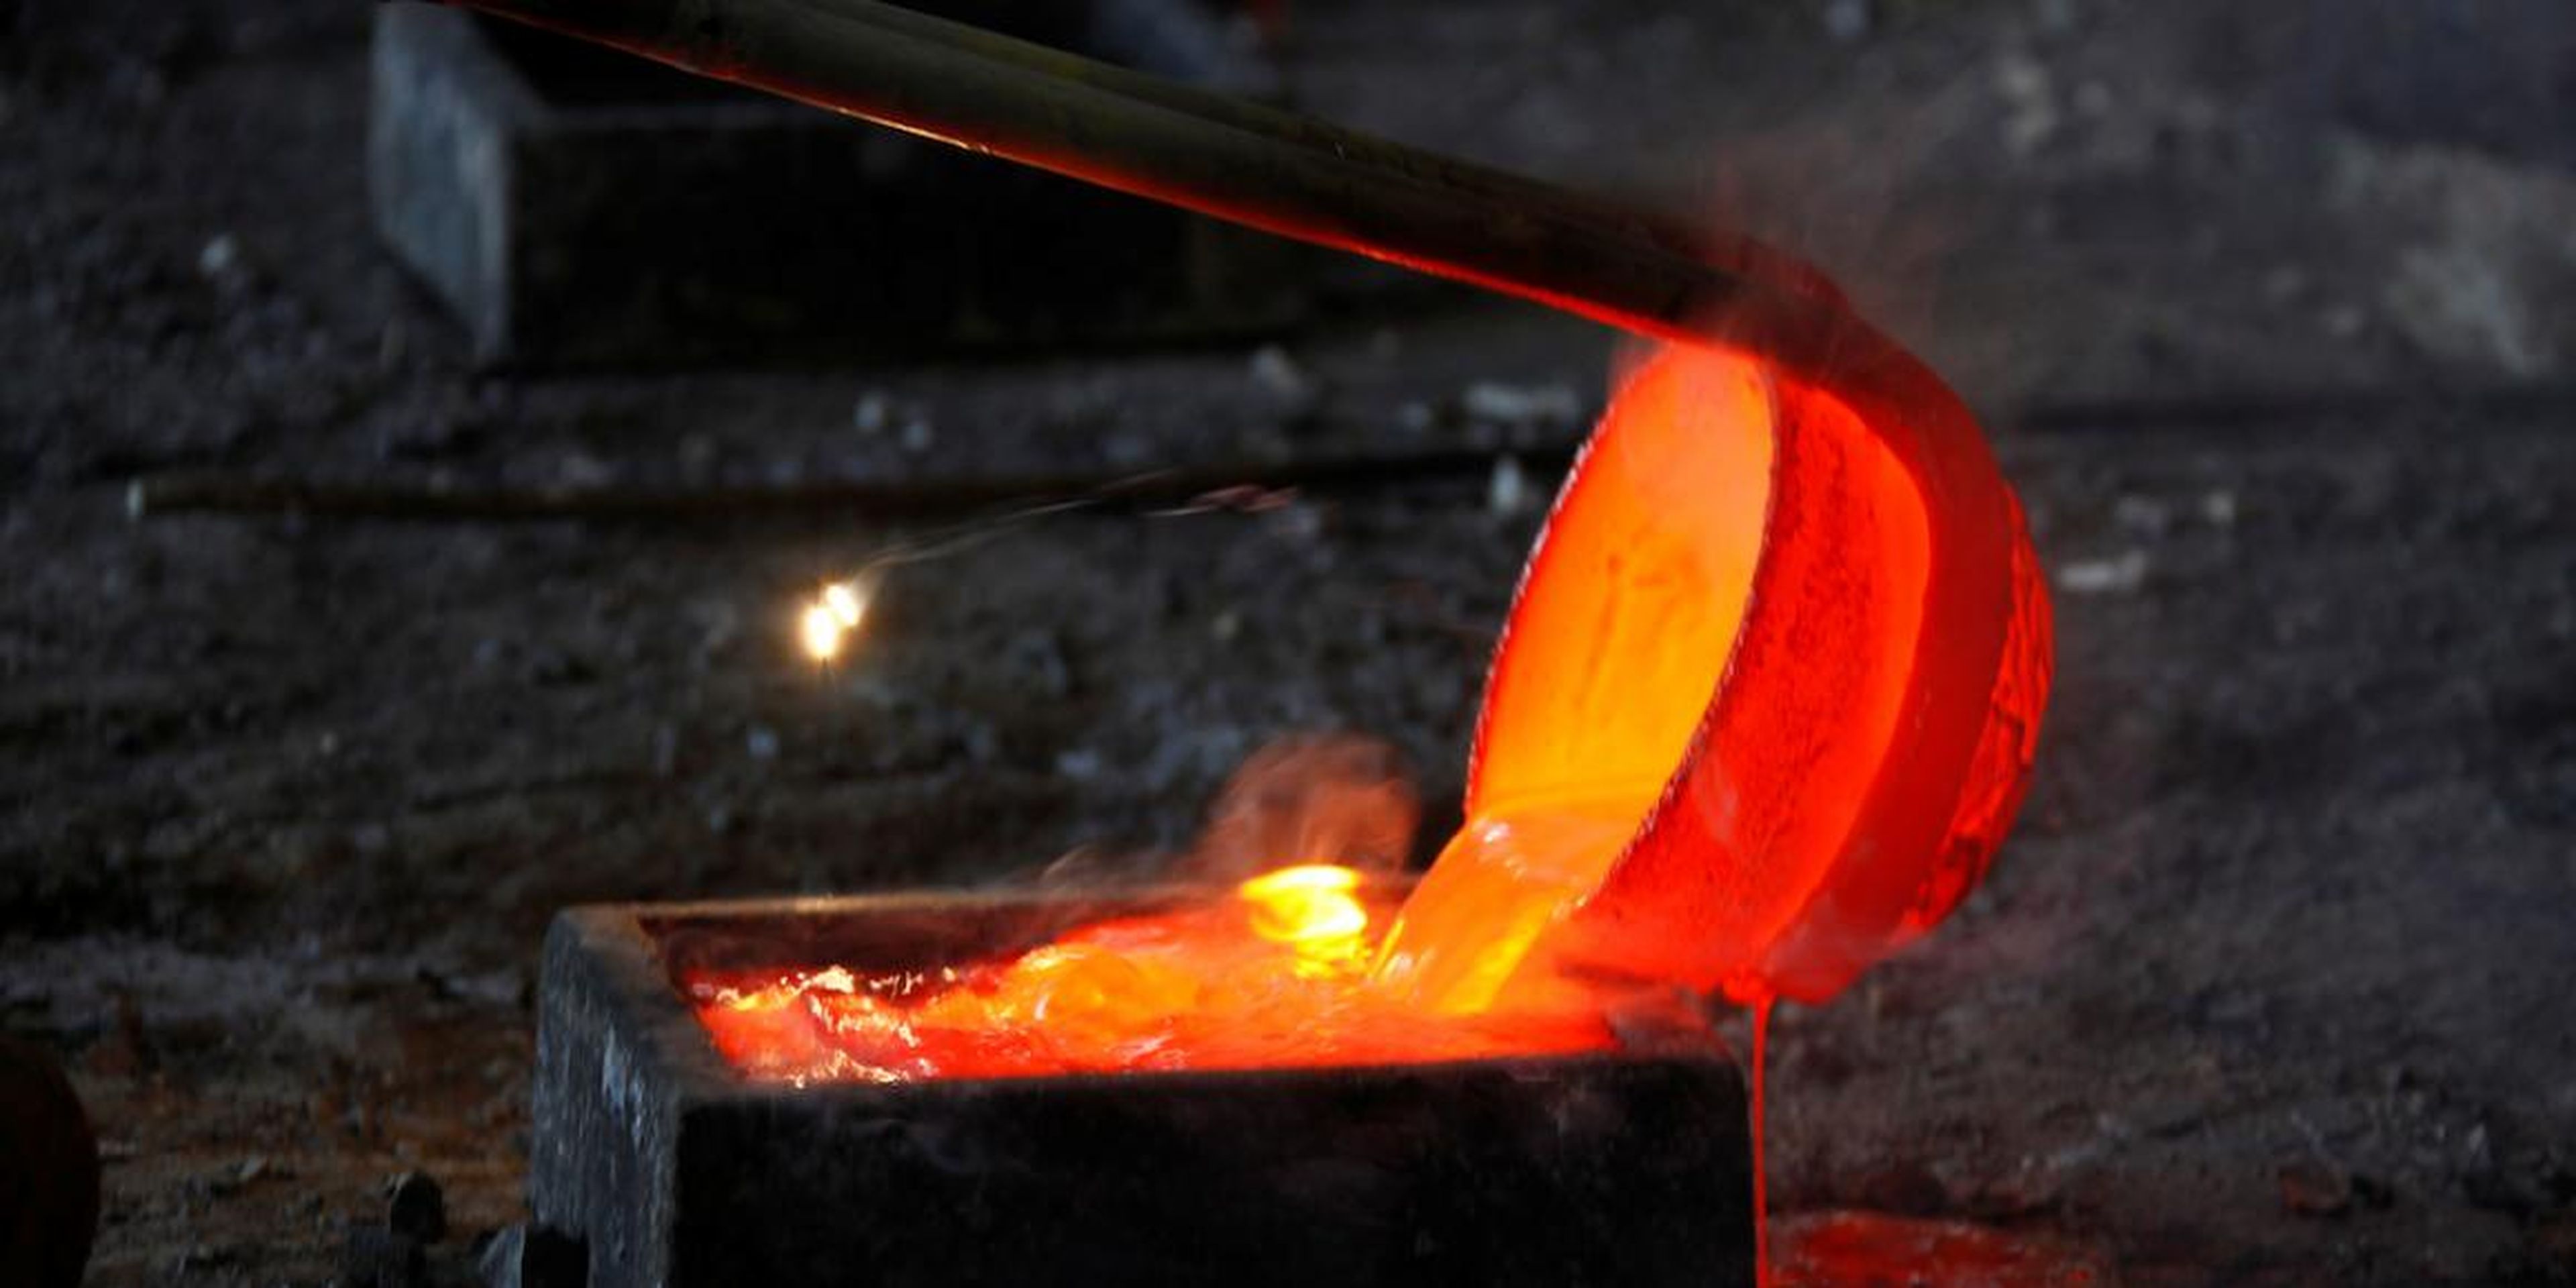 Molten lanthanum, a rare-earth metal, being poured into a mold at Jinyuan Company's smelting workshop near Damao in Inner Mongolia, China, in October 2010.